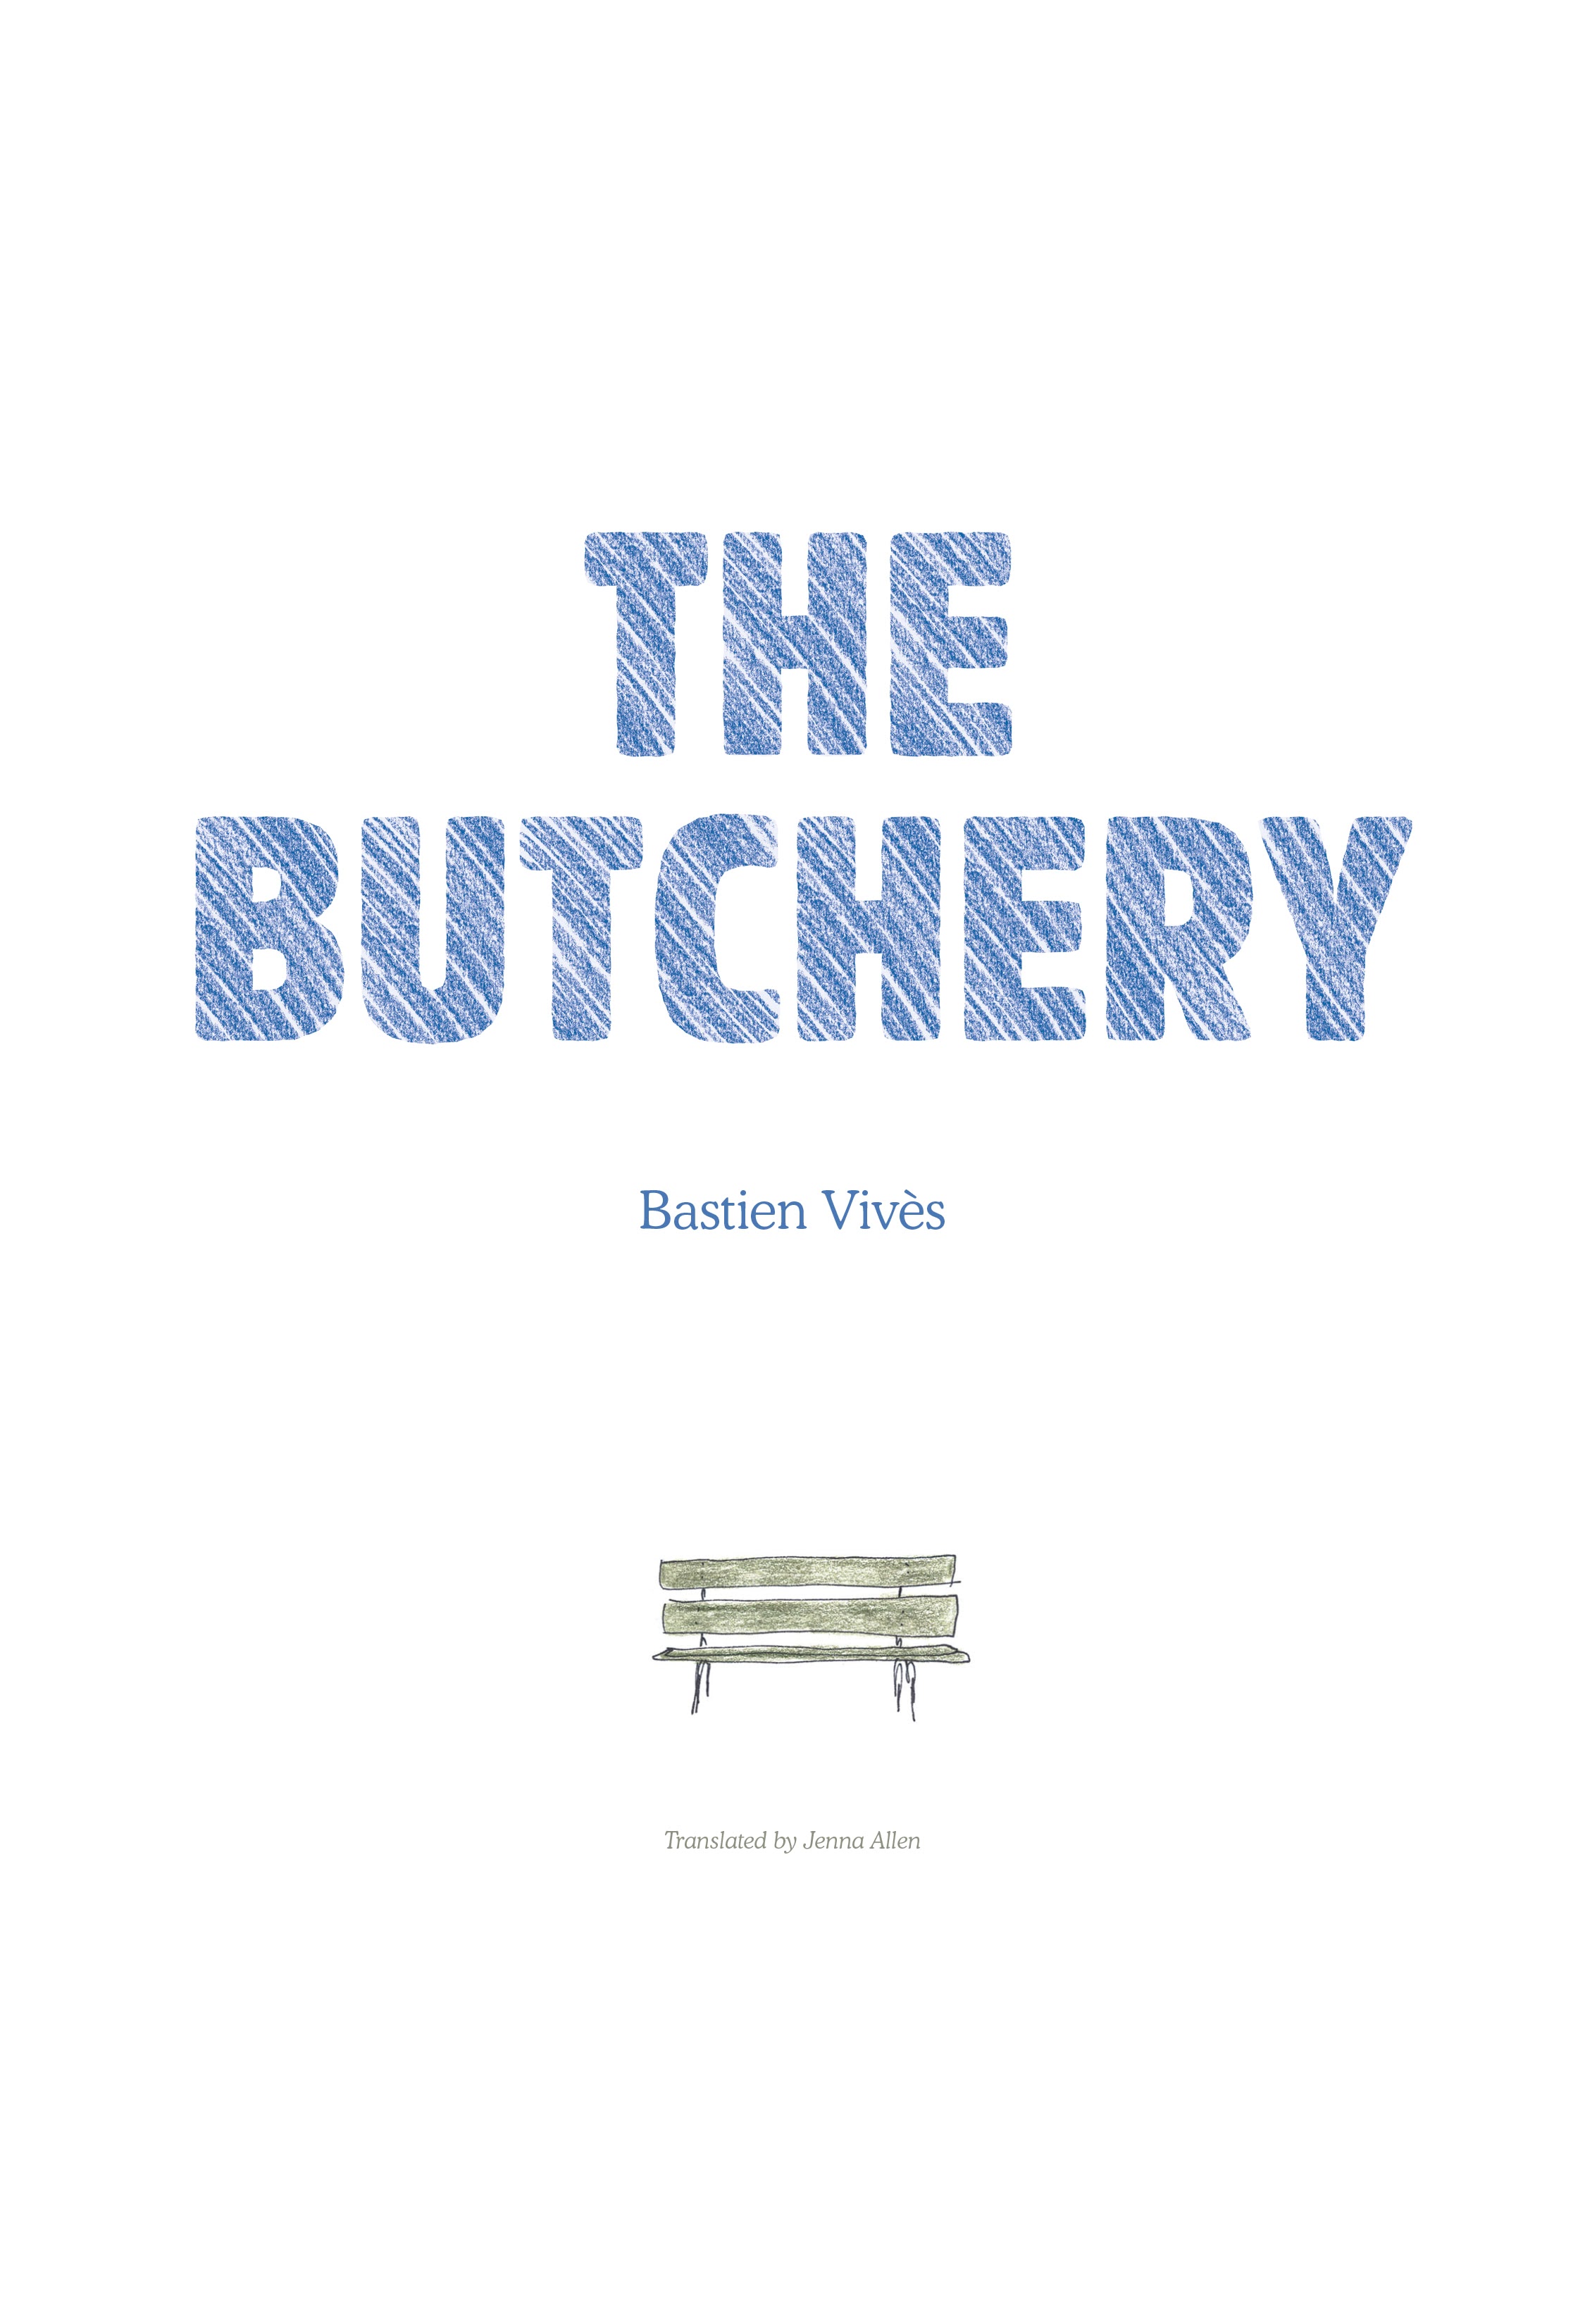 Read online The Butchery comic -  Issue # TPB - 4